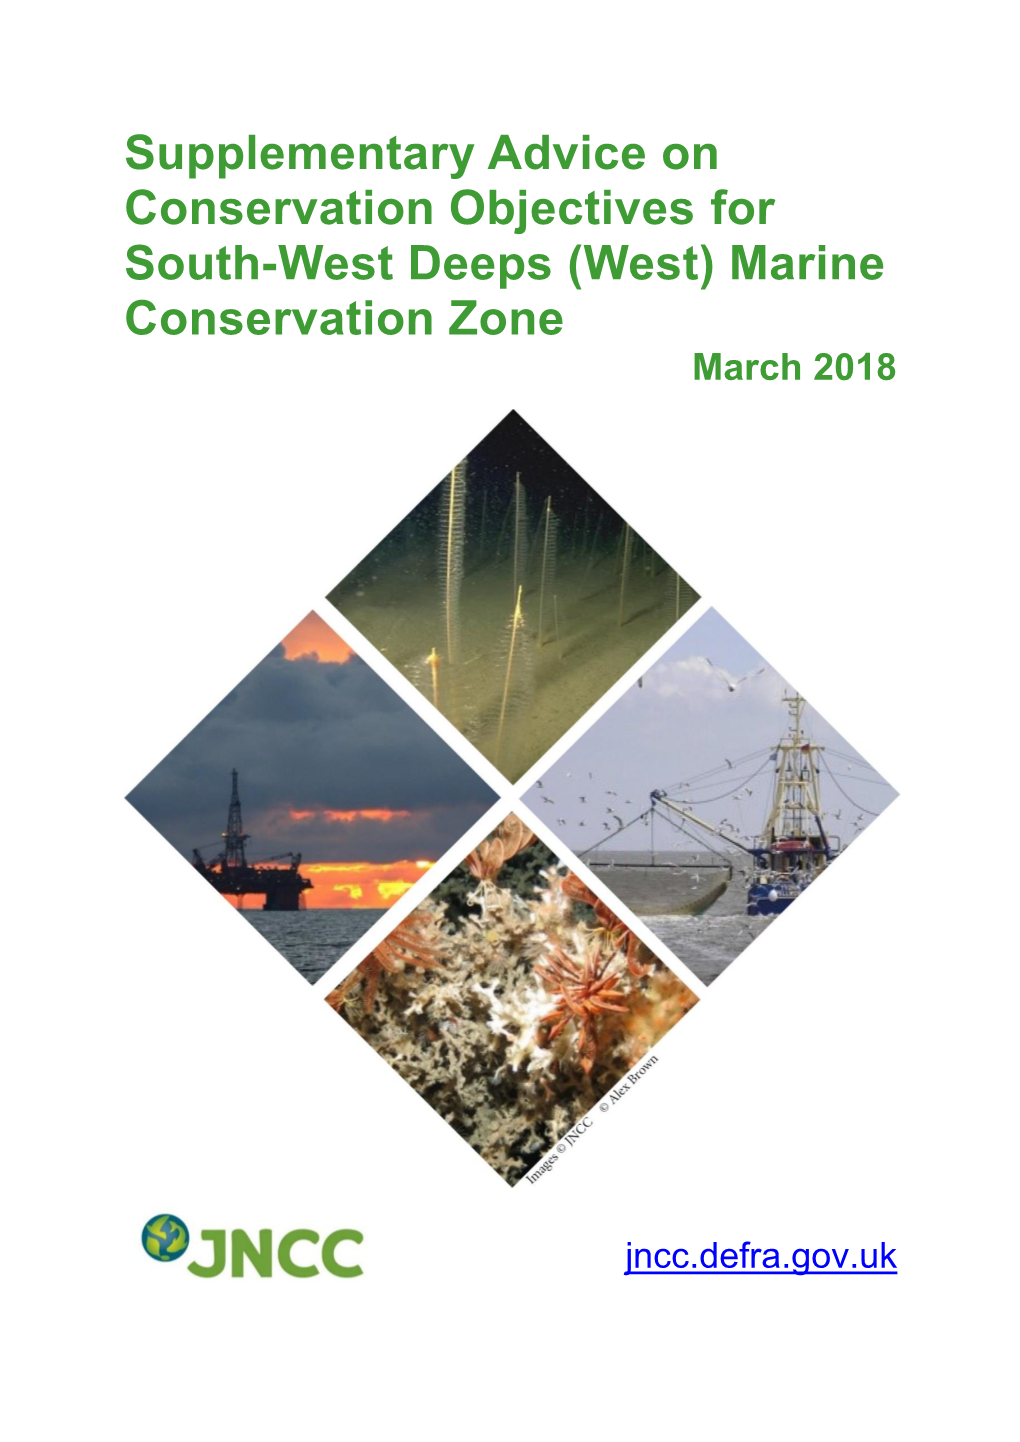 Supplementary Advice on Conservation Objectives for South-West Deeps (West) Marine Conservation Zone March 2018